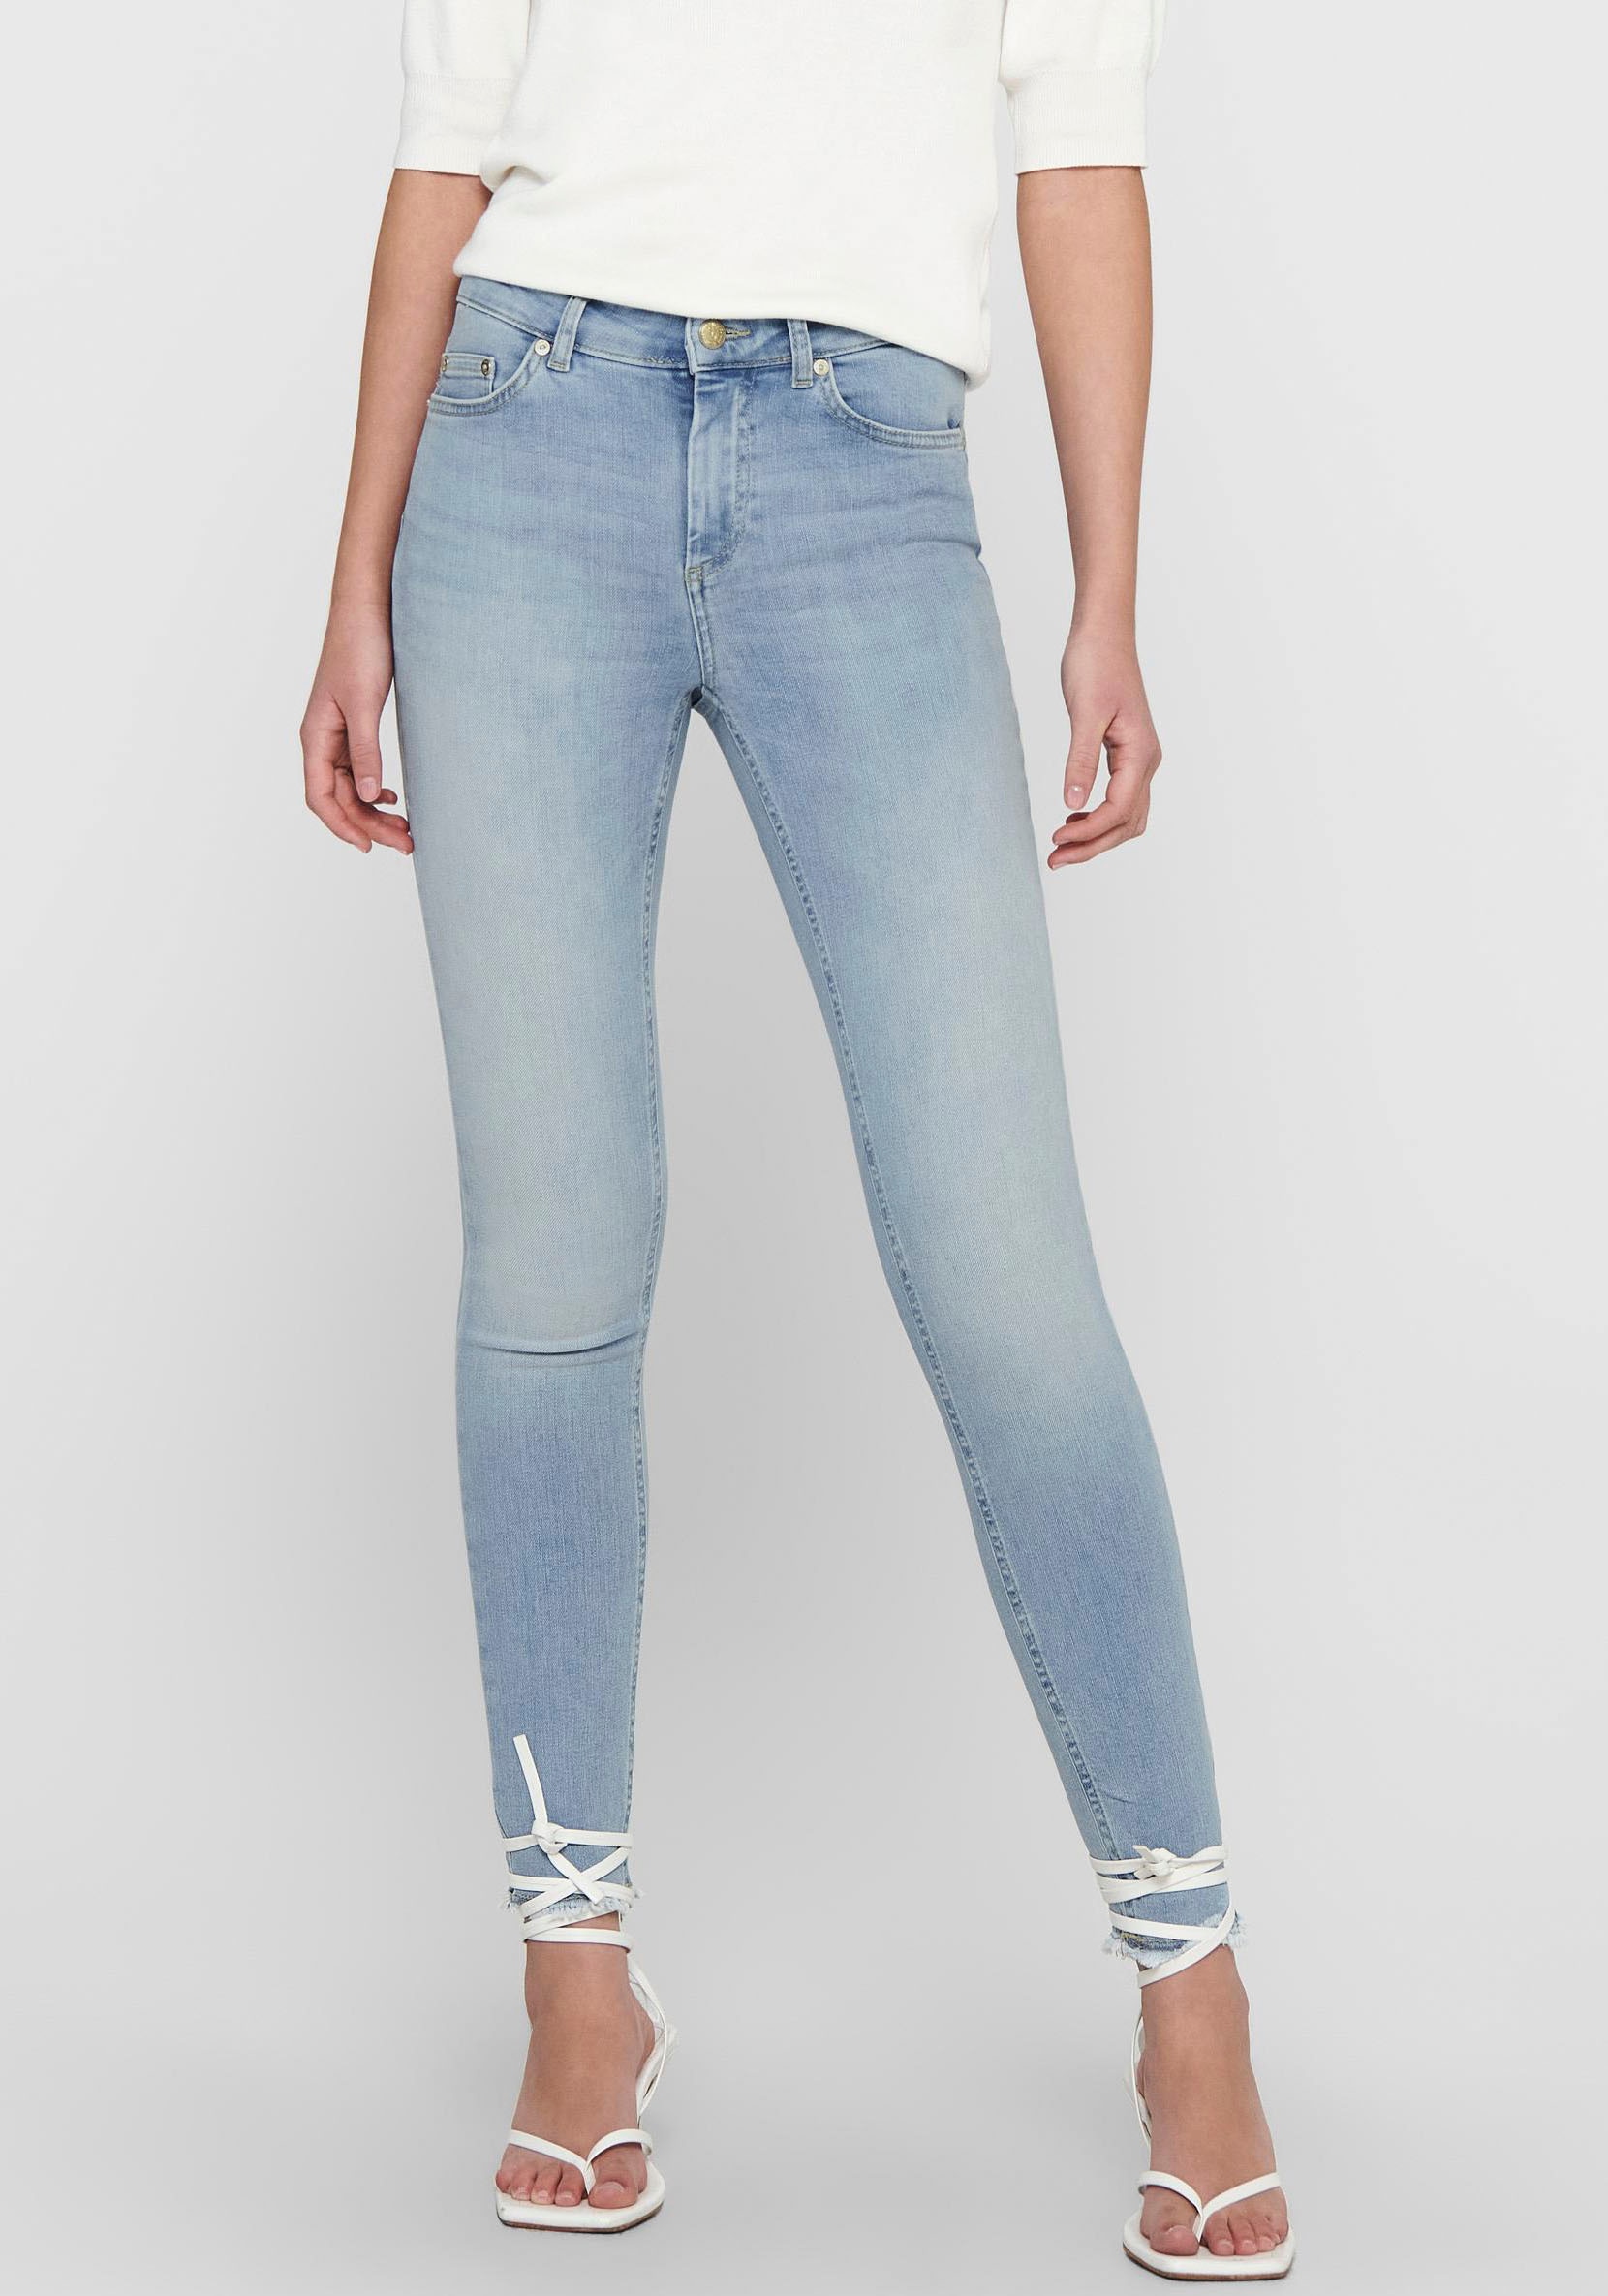 ONLY Ankle-Jeans »ONLBLUSH MID SK ANK RAW« von Only